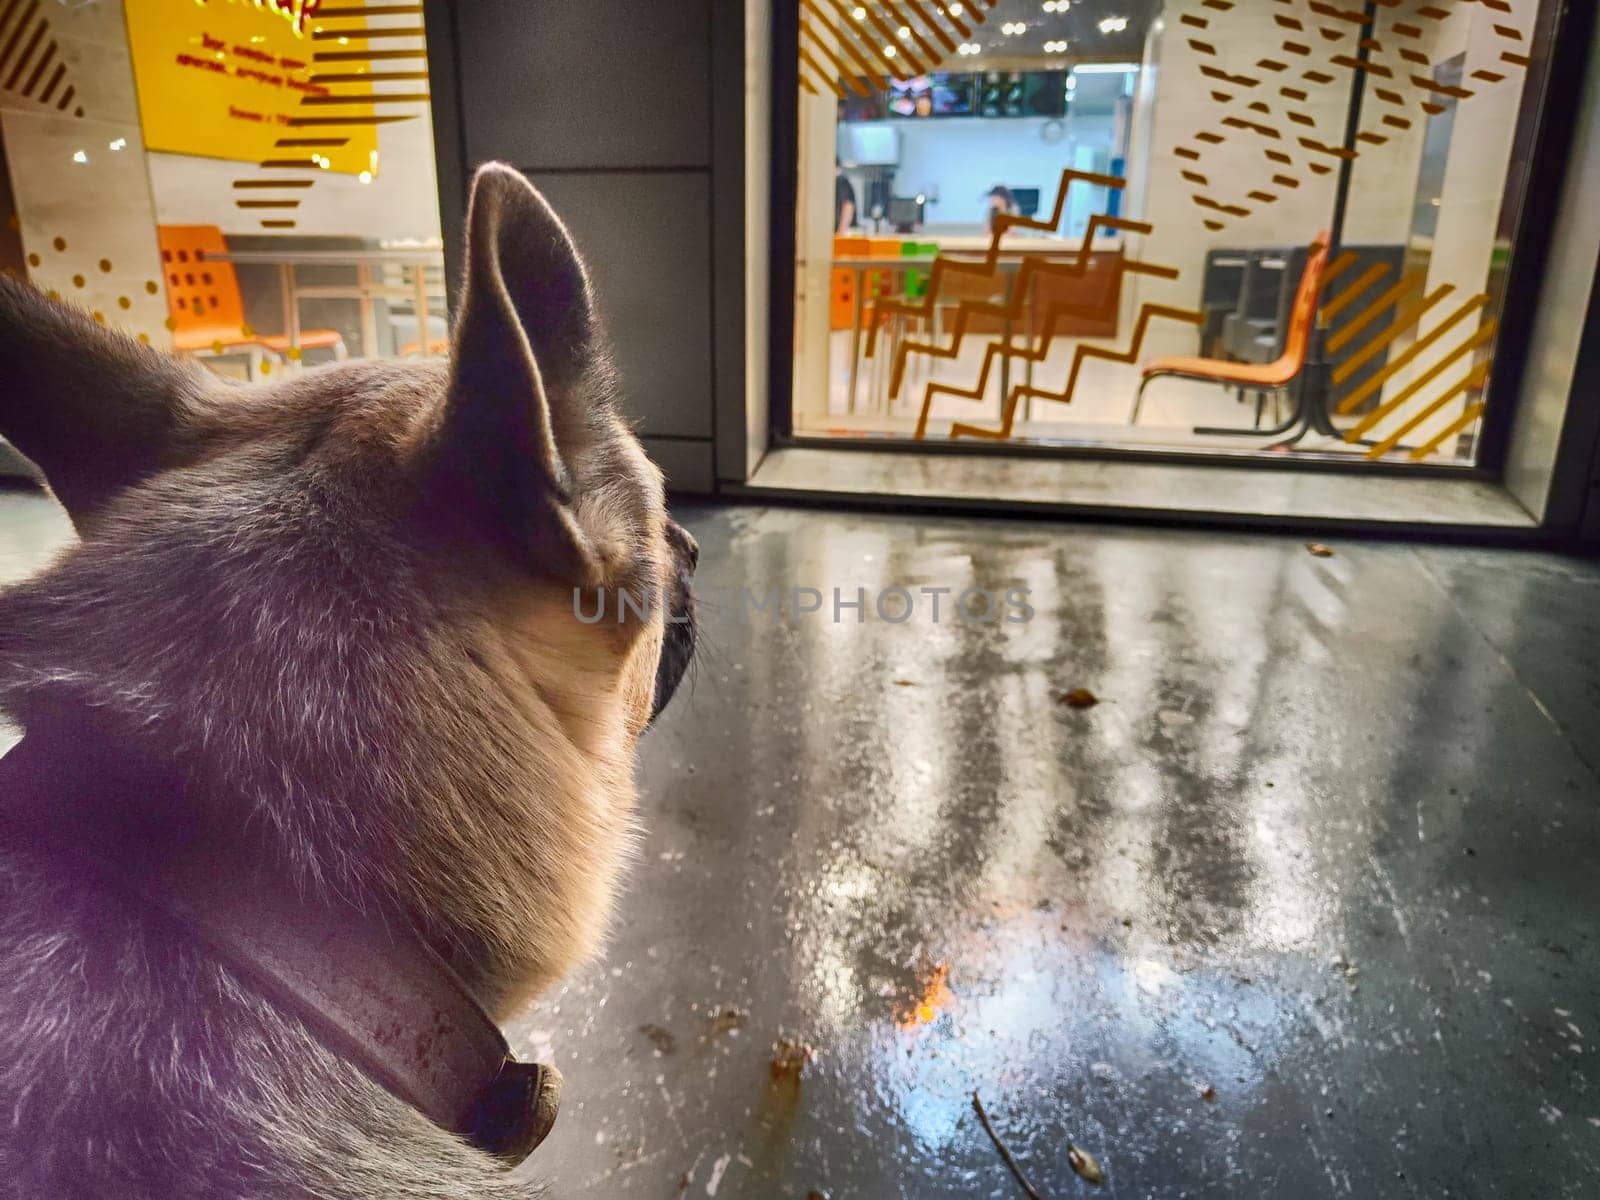 A lost shepherd dog near the window of a restaurant or store. A sad frozen hungry pet. Homeless animal by keleny